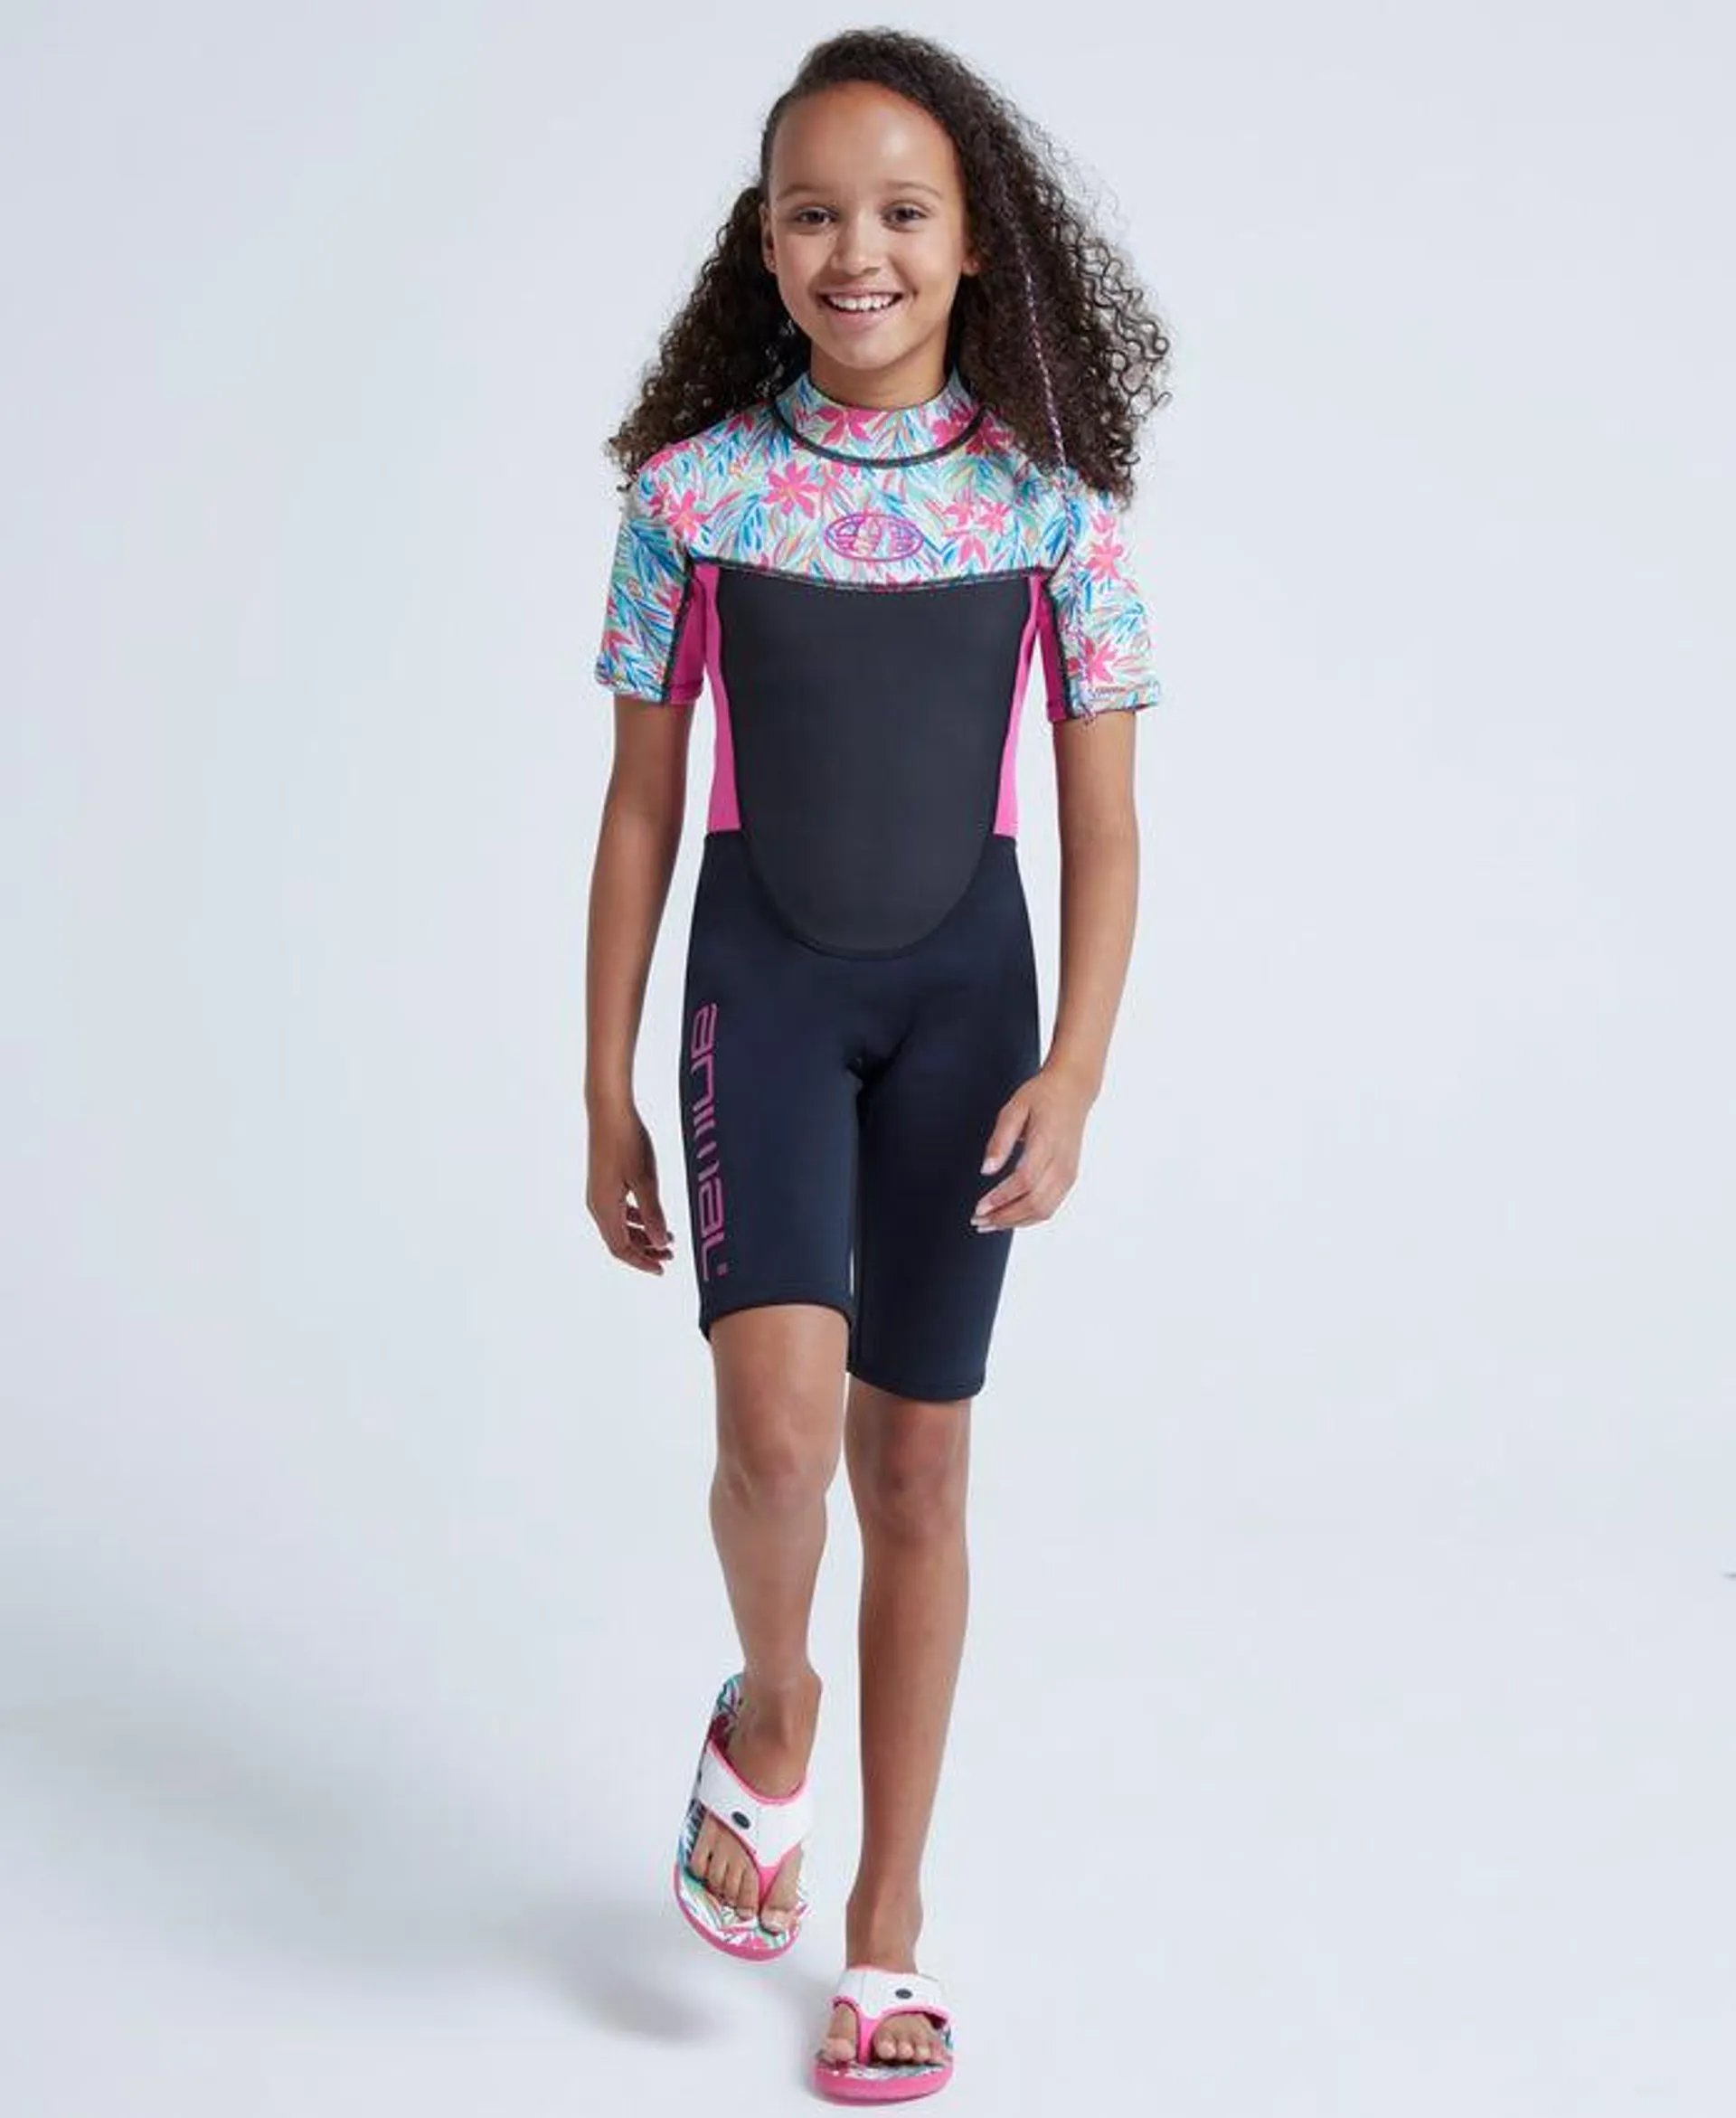 Waves Kids Printed Shorty Wetsuit